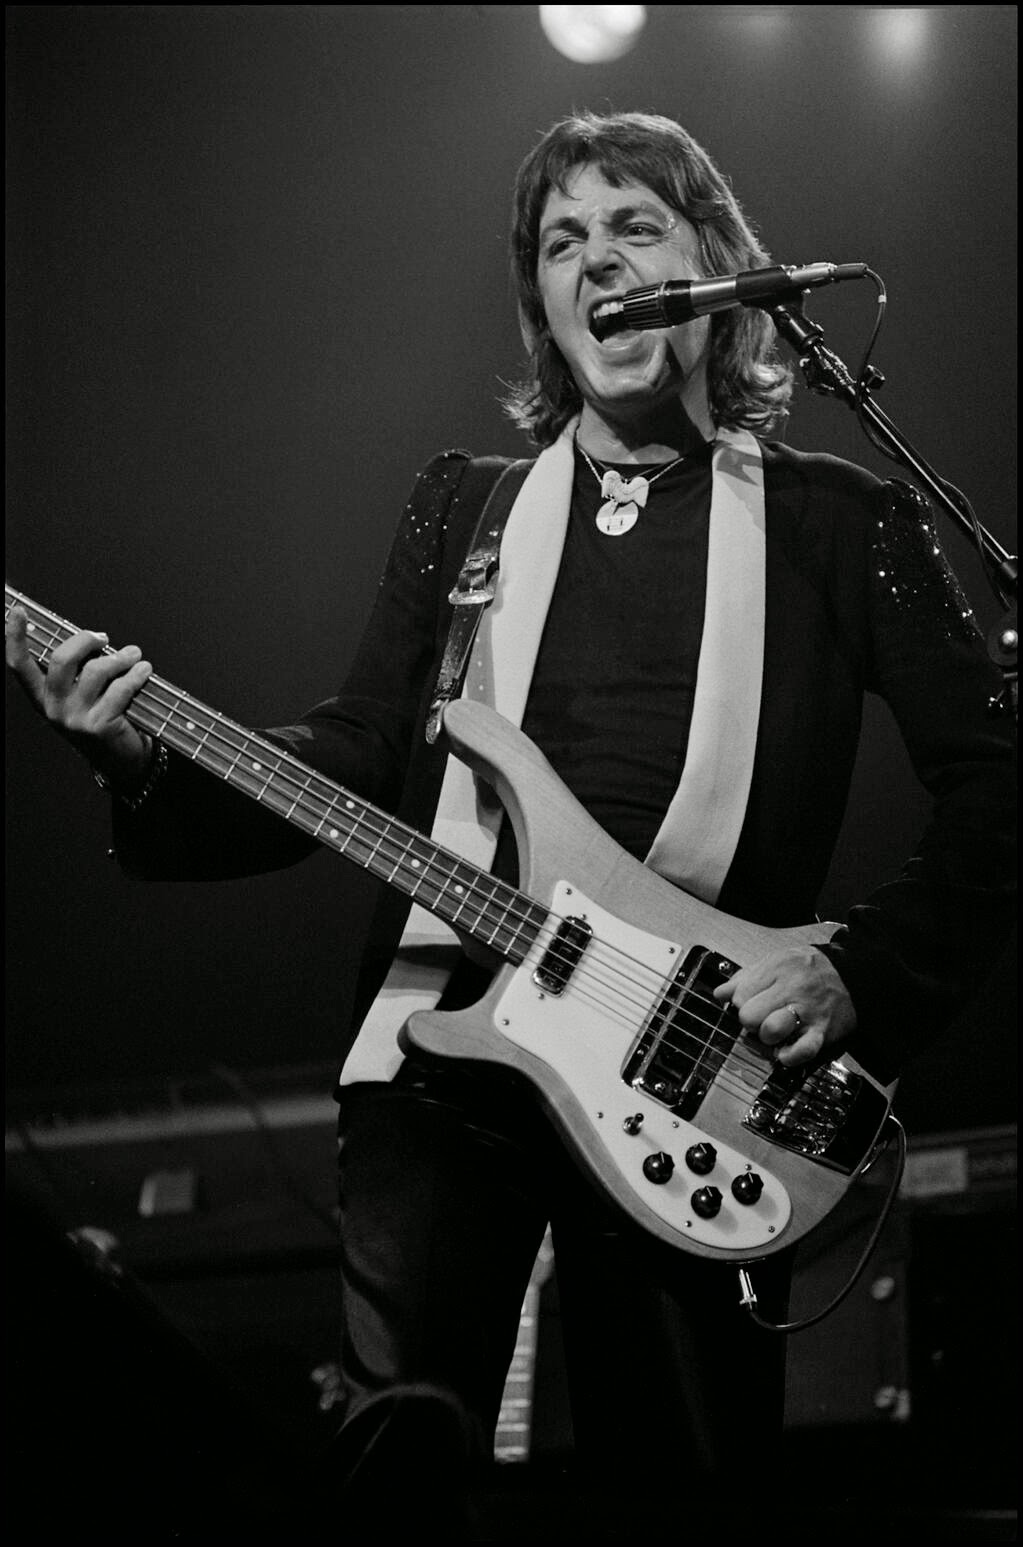 Paul_jamming_on_bass_with_his_mullet_unf_bby._Rock_show._Wings._Super_favorite